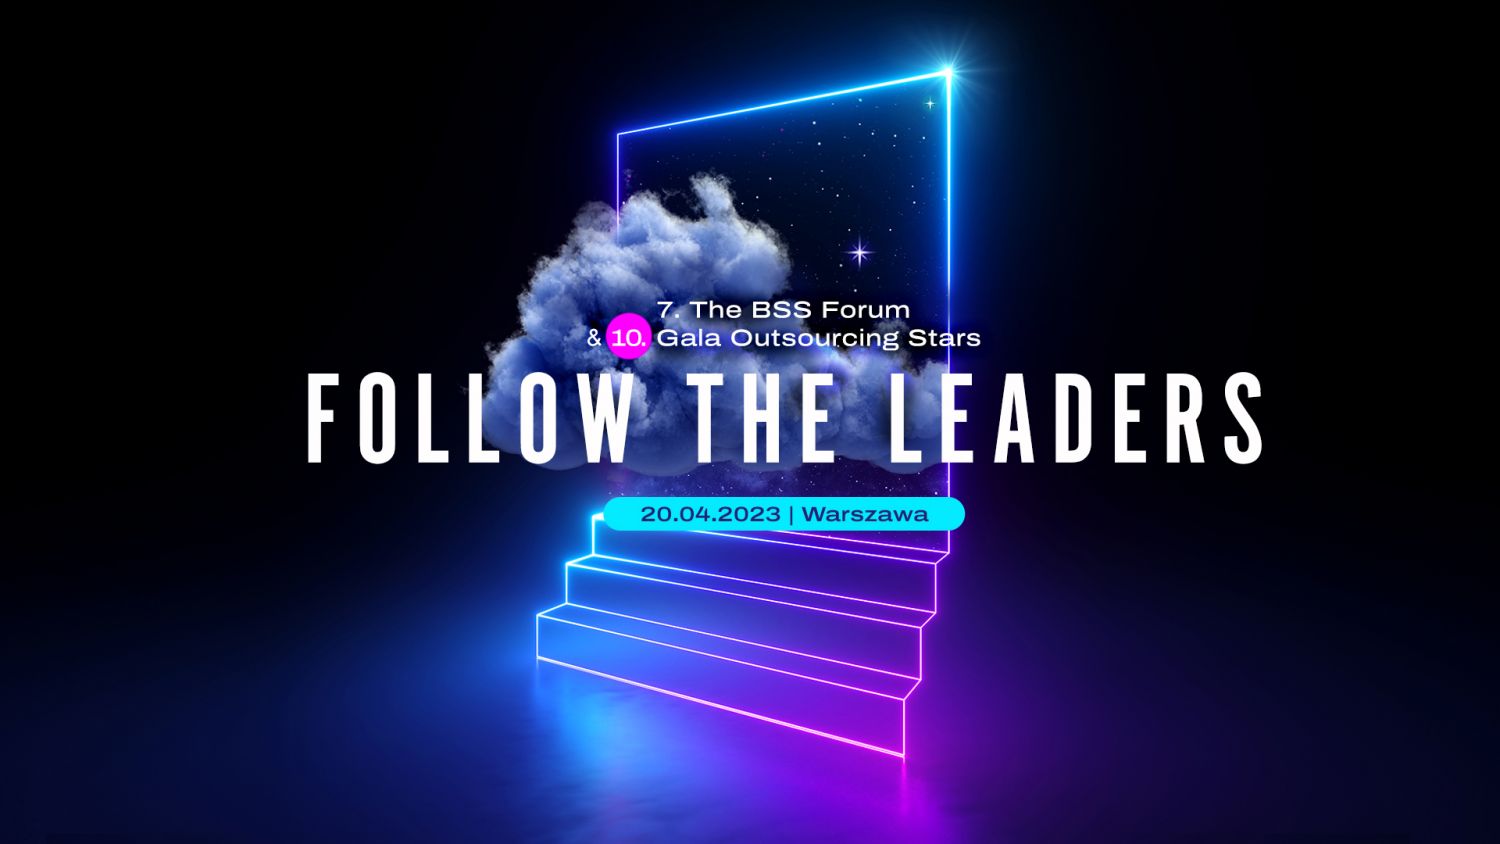 7. The BSS Forum „Follow The Leaders”